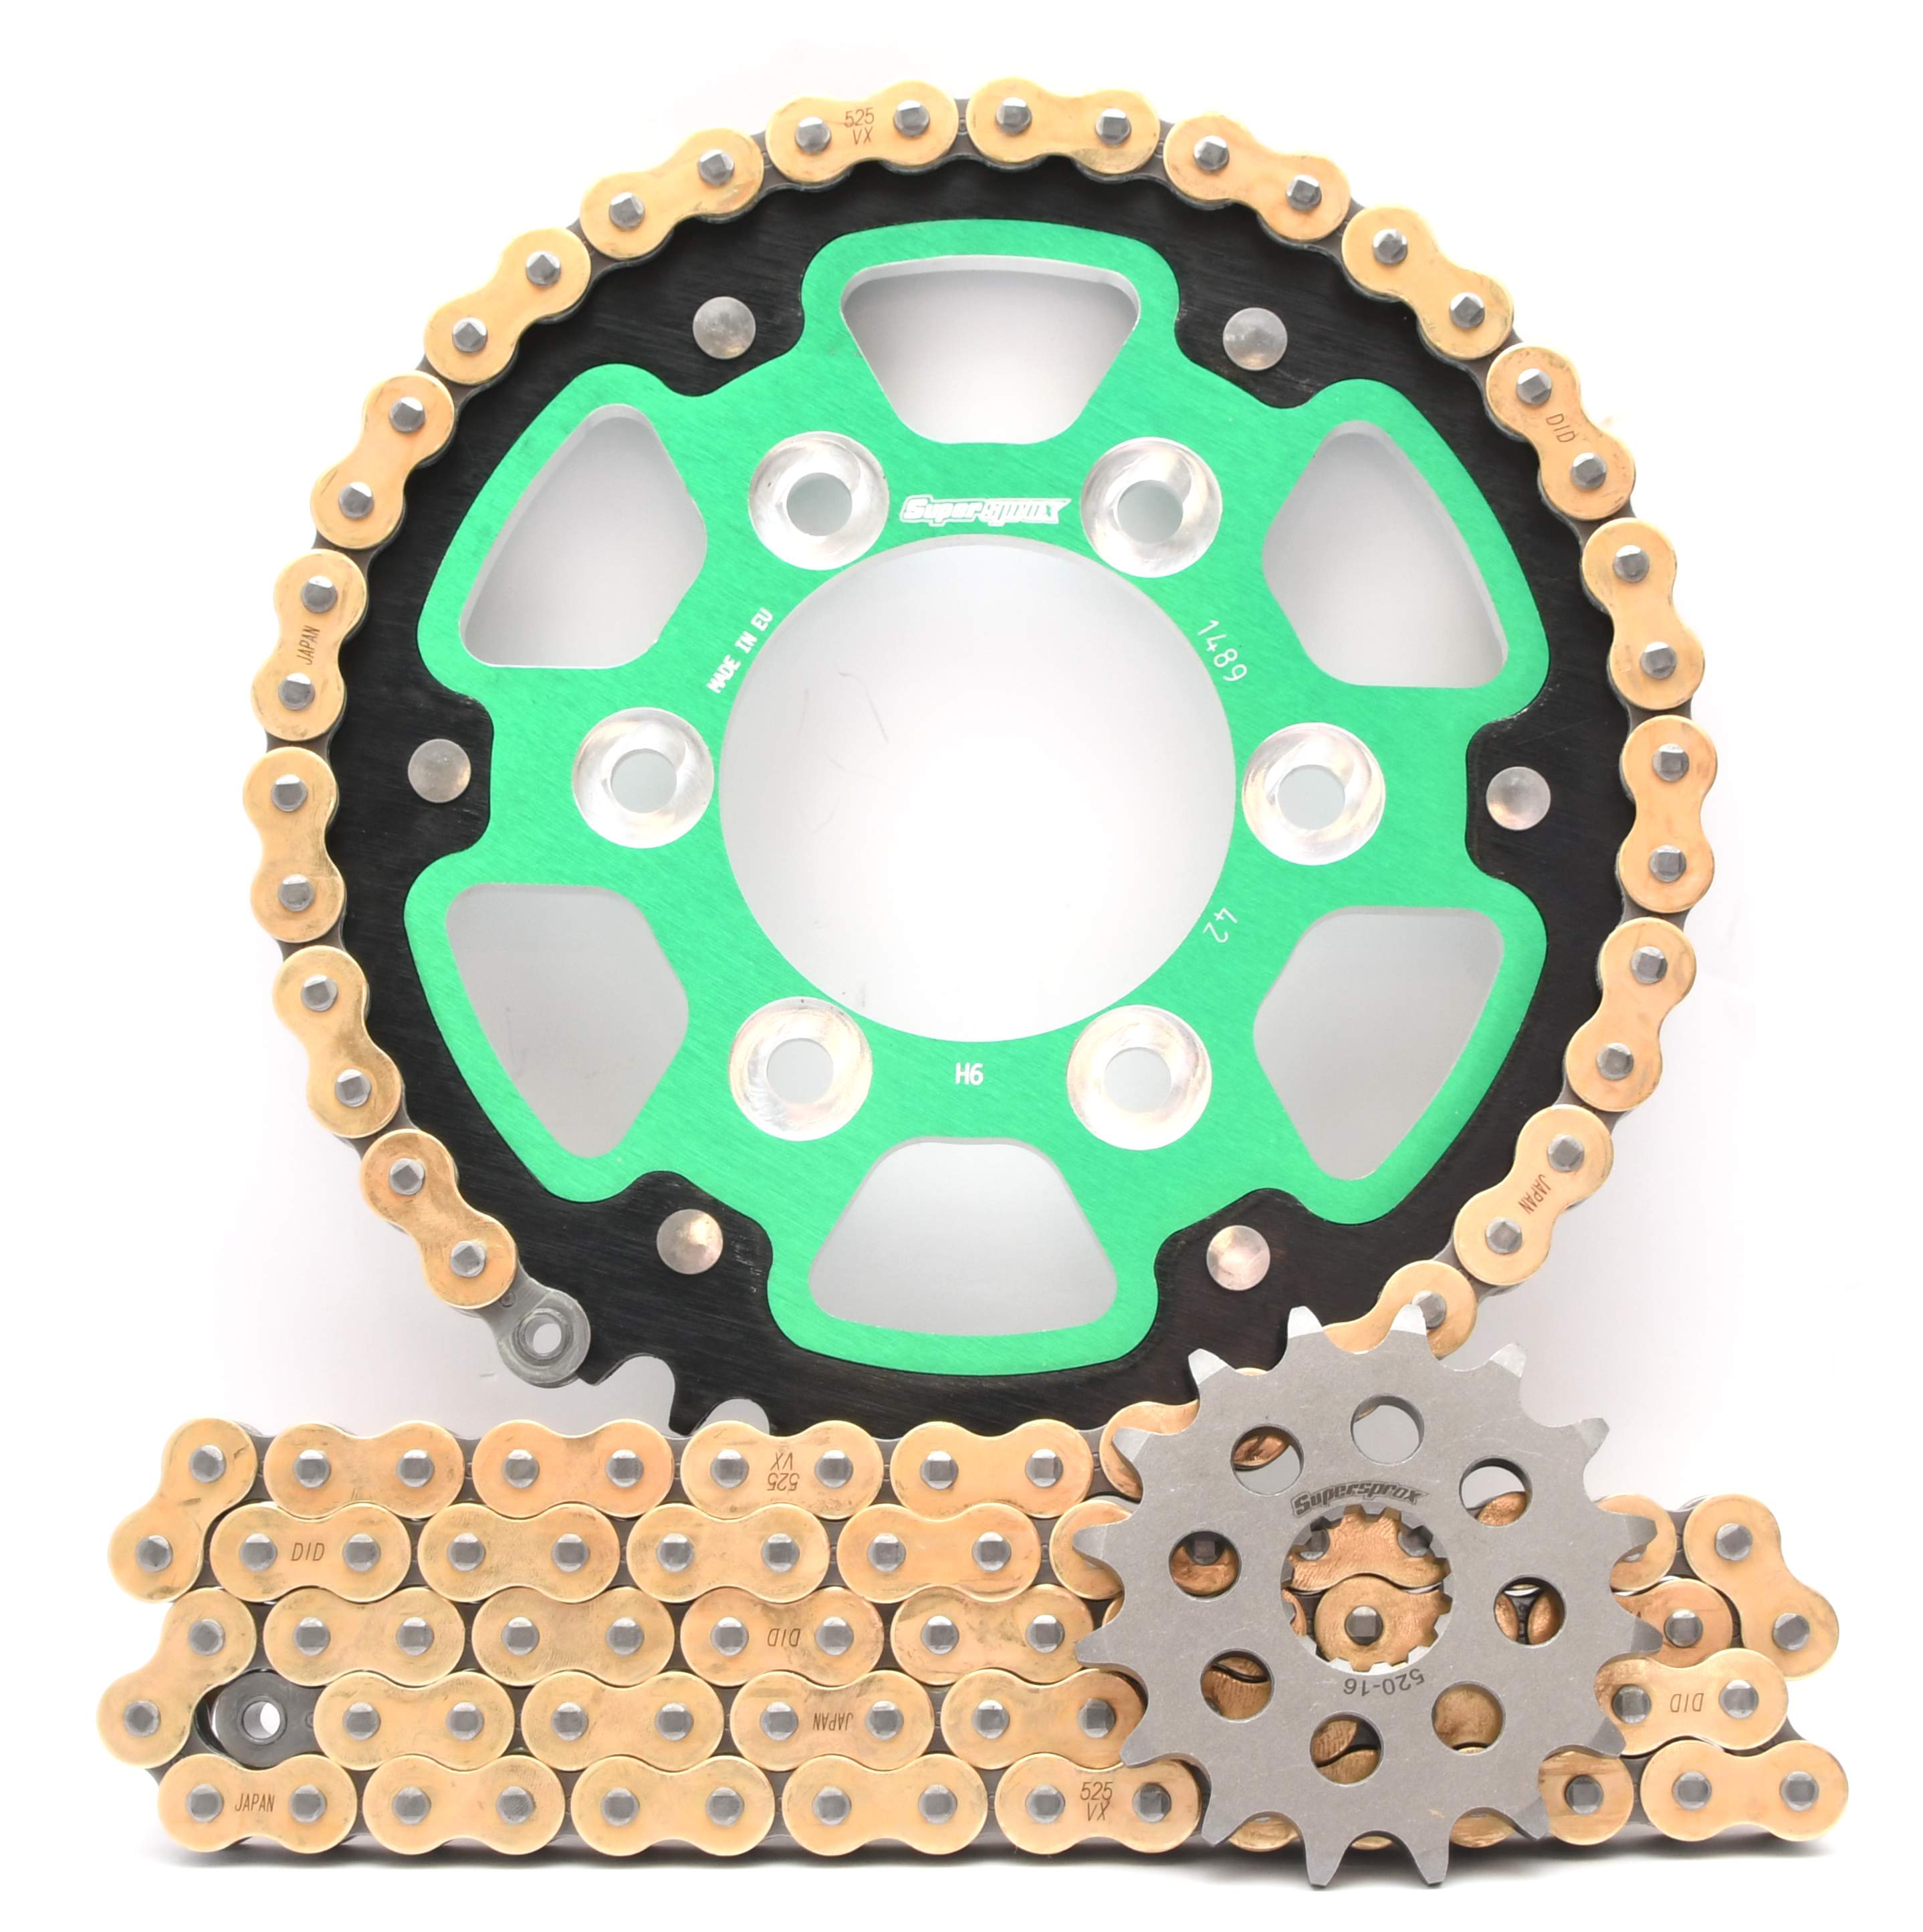 Supersprox Chain & Sprocket Kit for Kawasaki Z900RS 2018> - Standard Gearing - 0